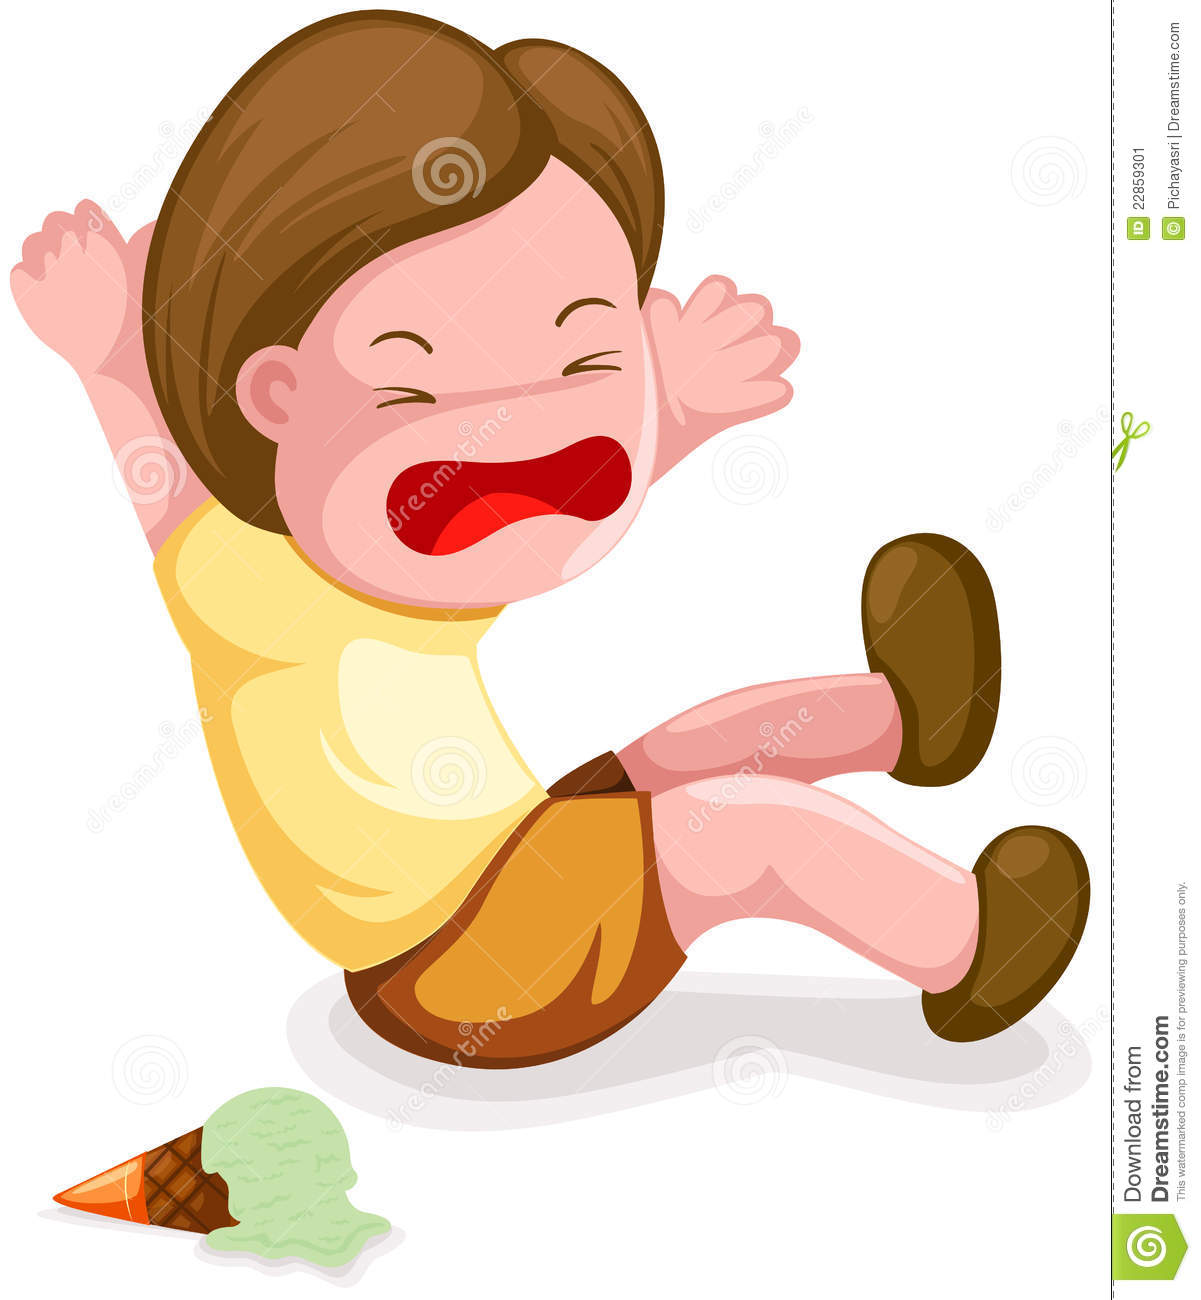 Galleries Related  Falling Clipart  Fall Down Stairs  Fall Down